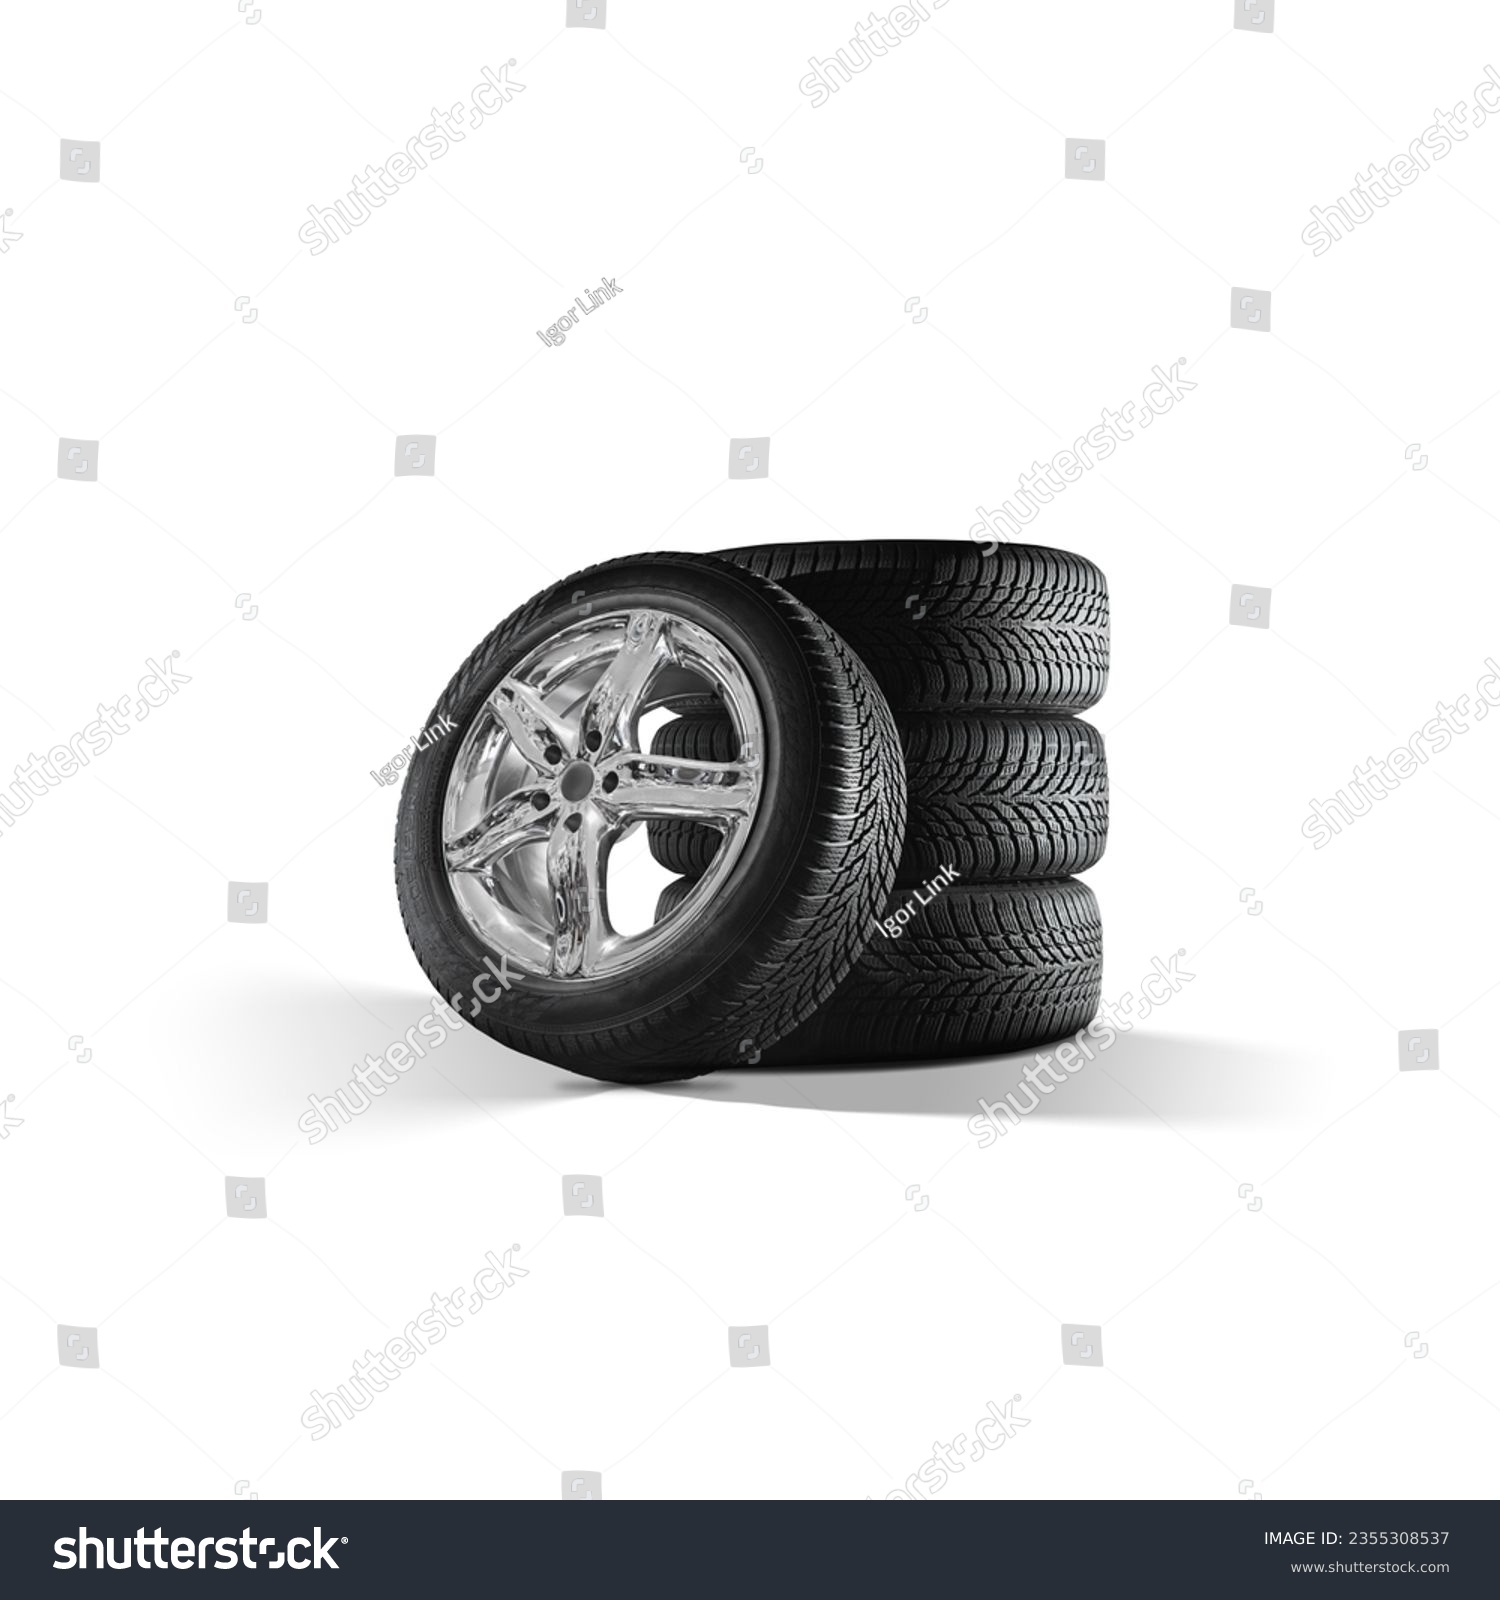 Car tires with a great profile and shiny chrome alloy wheels on isolated white Background.  Set of summer or winter tyres in front of white fond. #2355308537